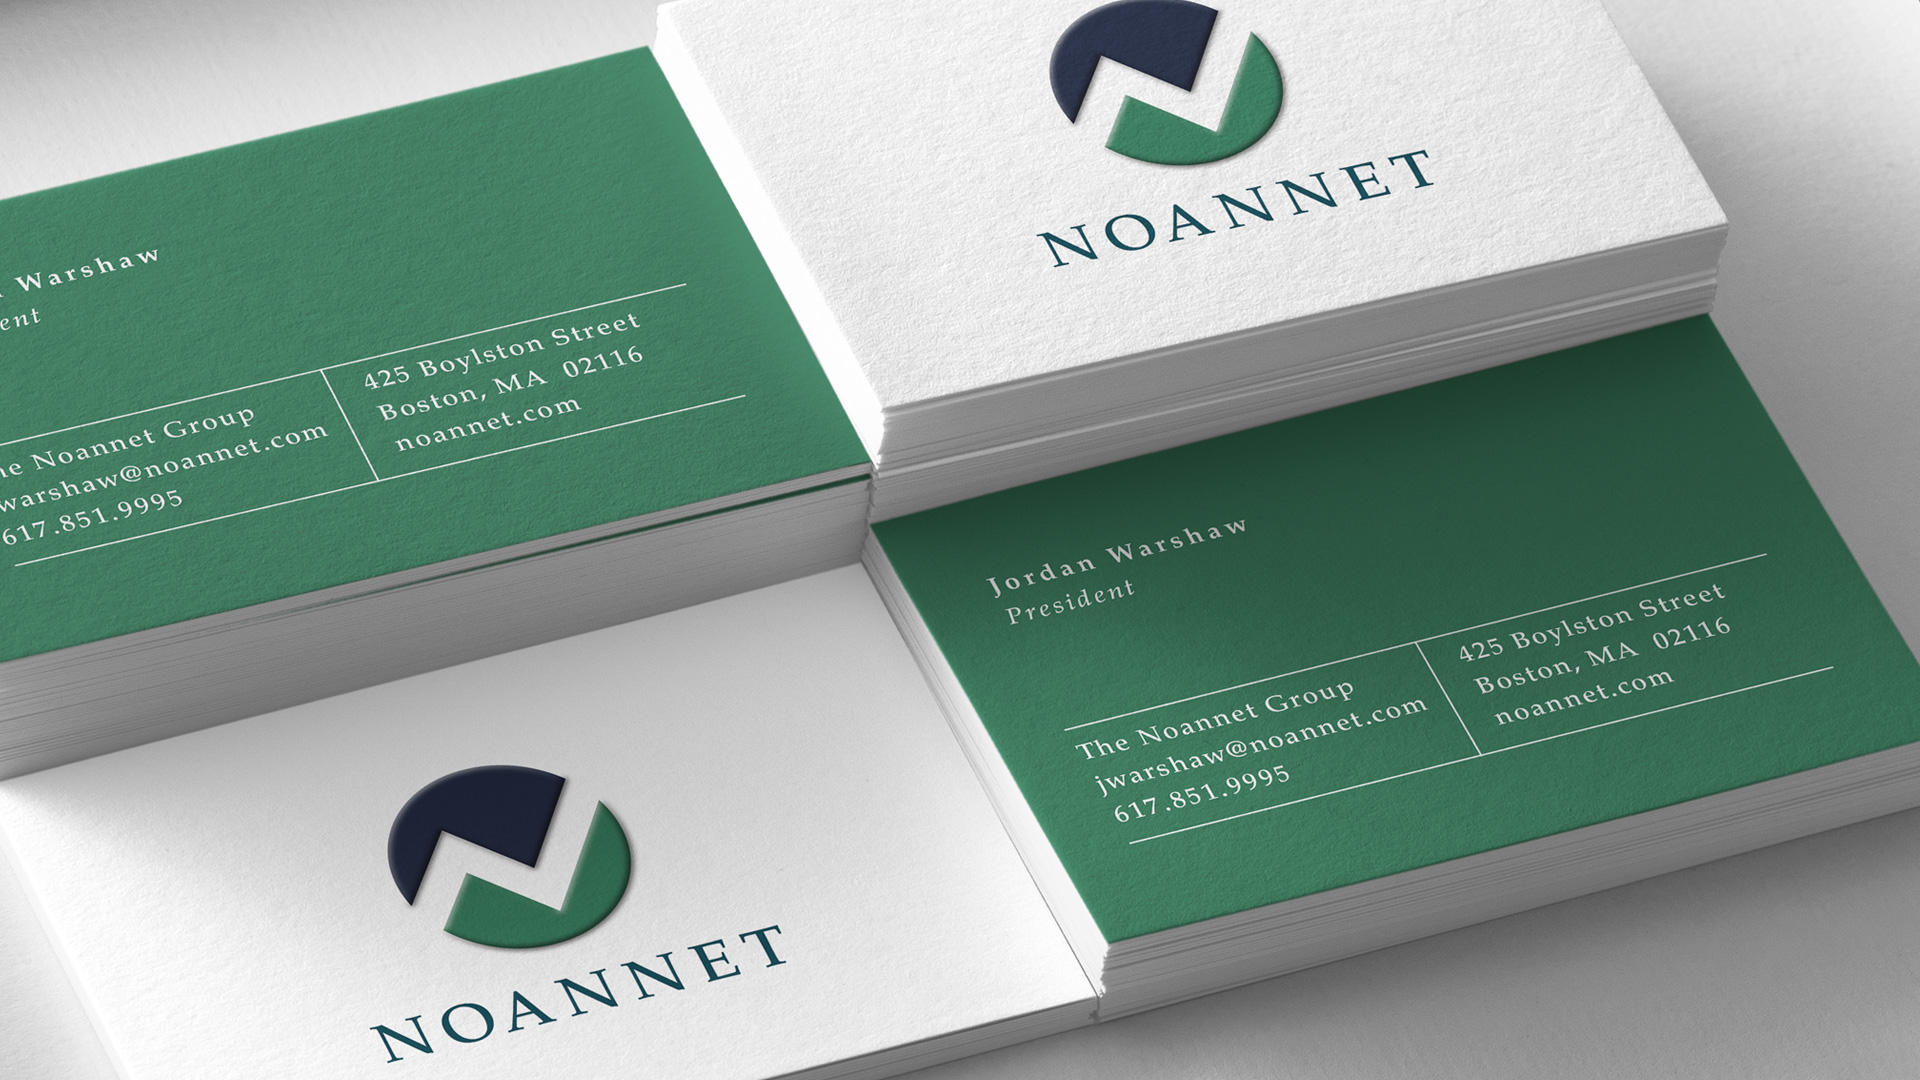 Noannet business cards